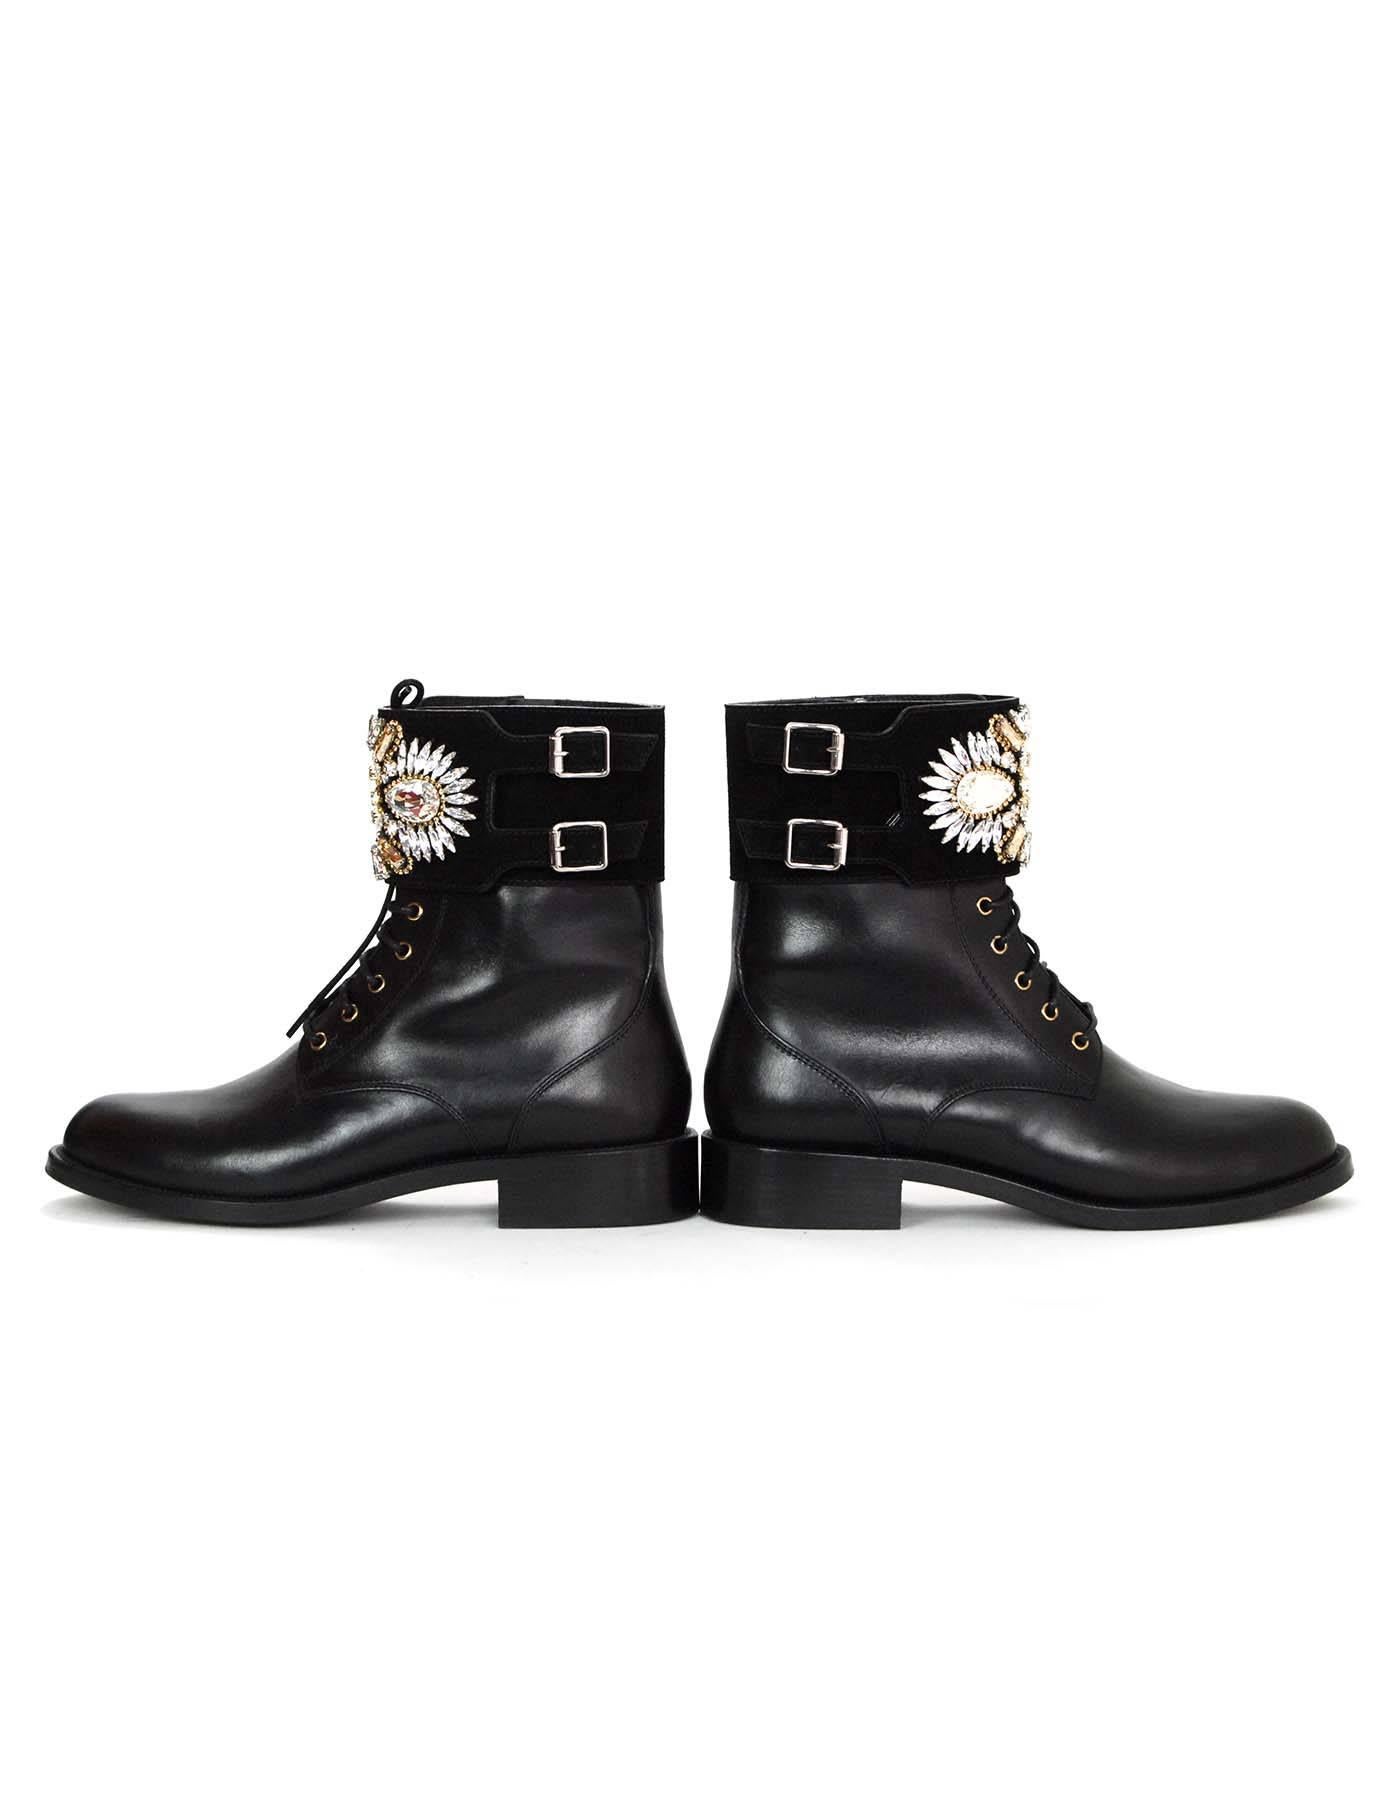 Rene Caovilla Black Leather and Jeweled Combat Boots Sz 38 In Excellent Condition In New York, NY